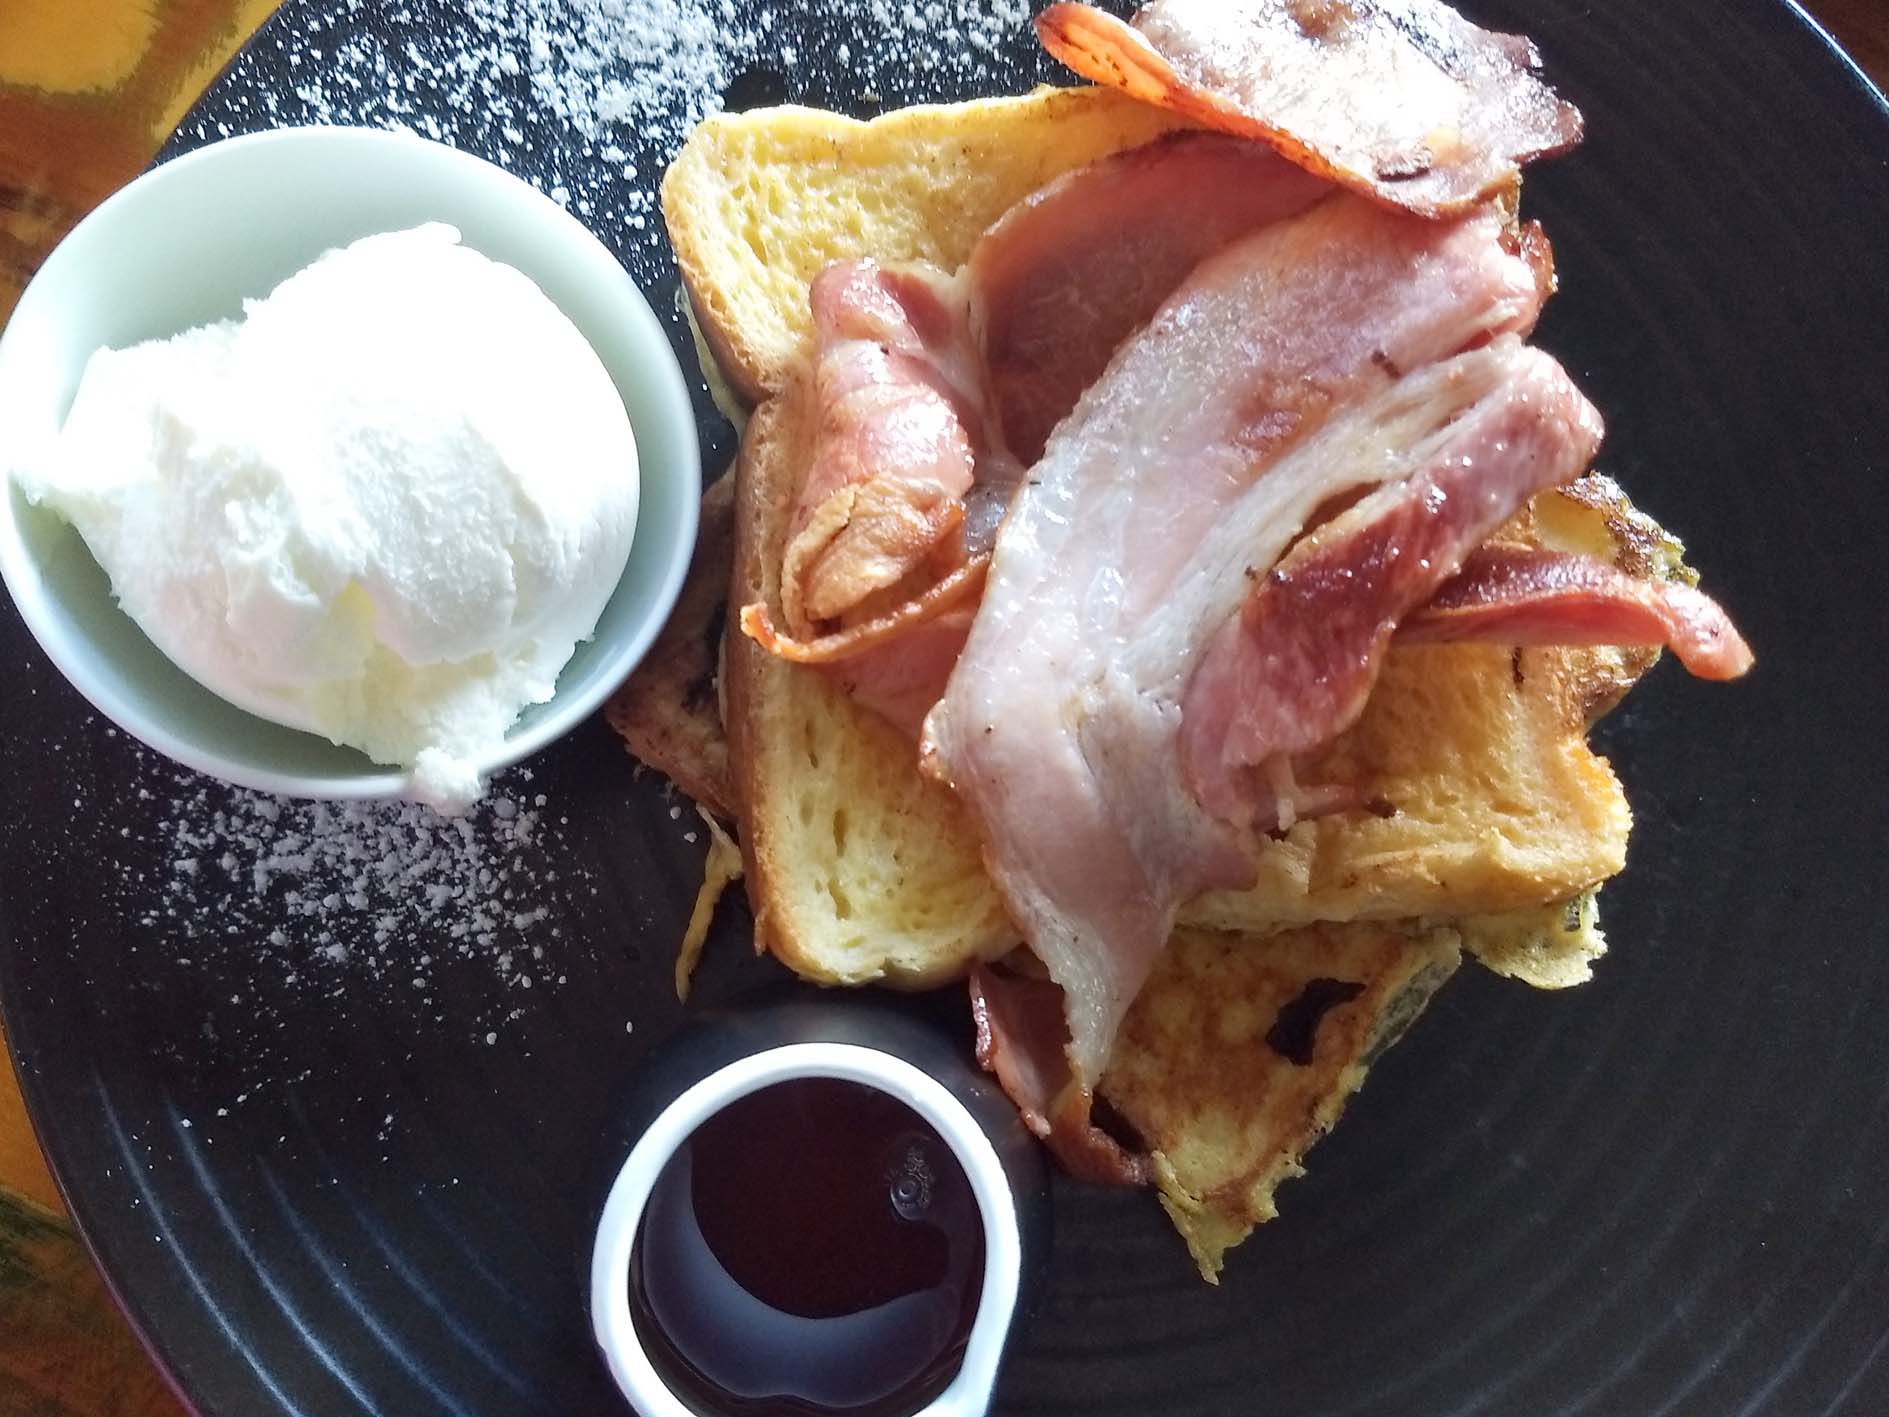 French toast with bacon and ice cream at the Queens Park Cafe